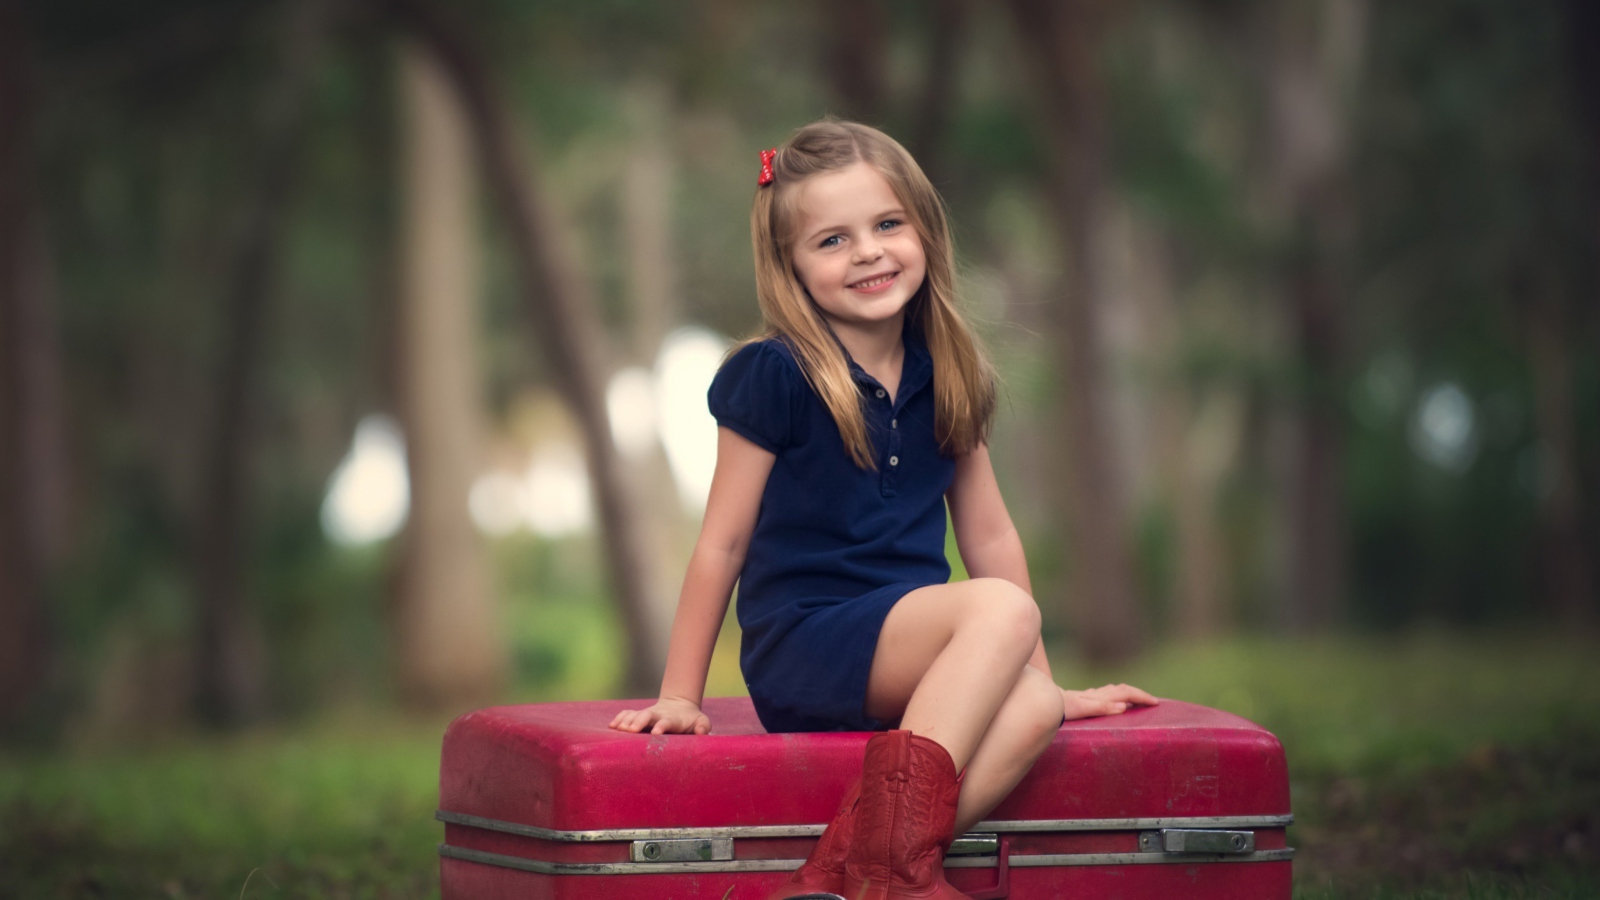 Обои Little Girl Sitting On Red Suitcase 1600x900